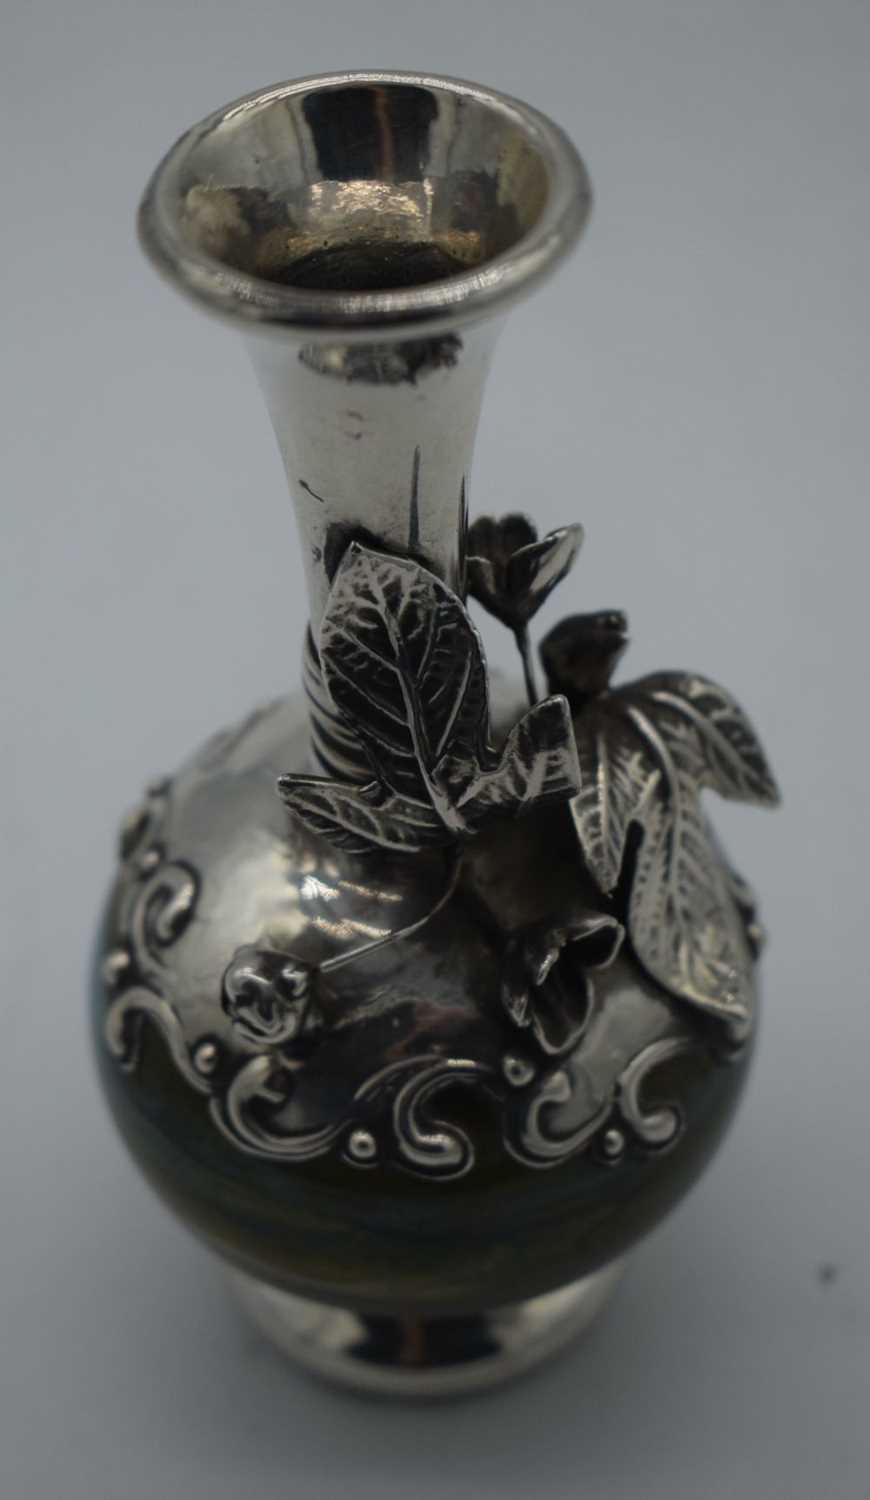 AN ART NOUVEAU SILVER MOUNTED GLASS VASE. 100 grams. 14 cm high. - Image 4 of 4